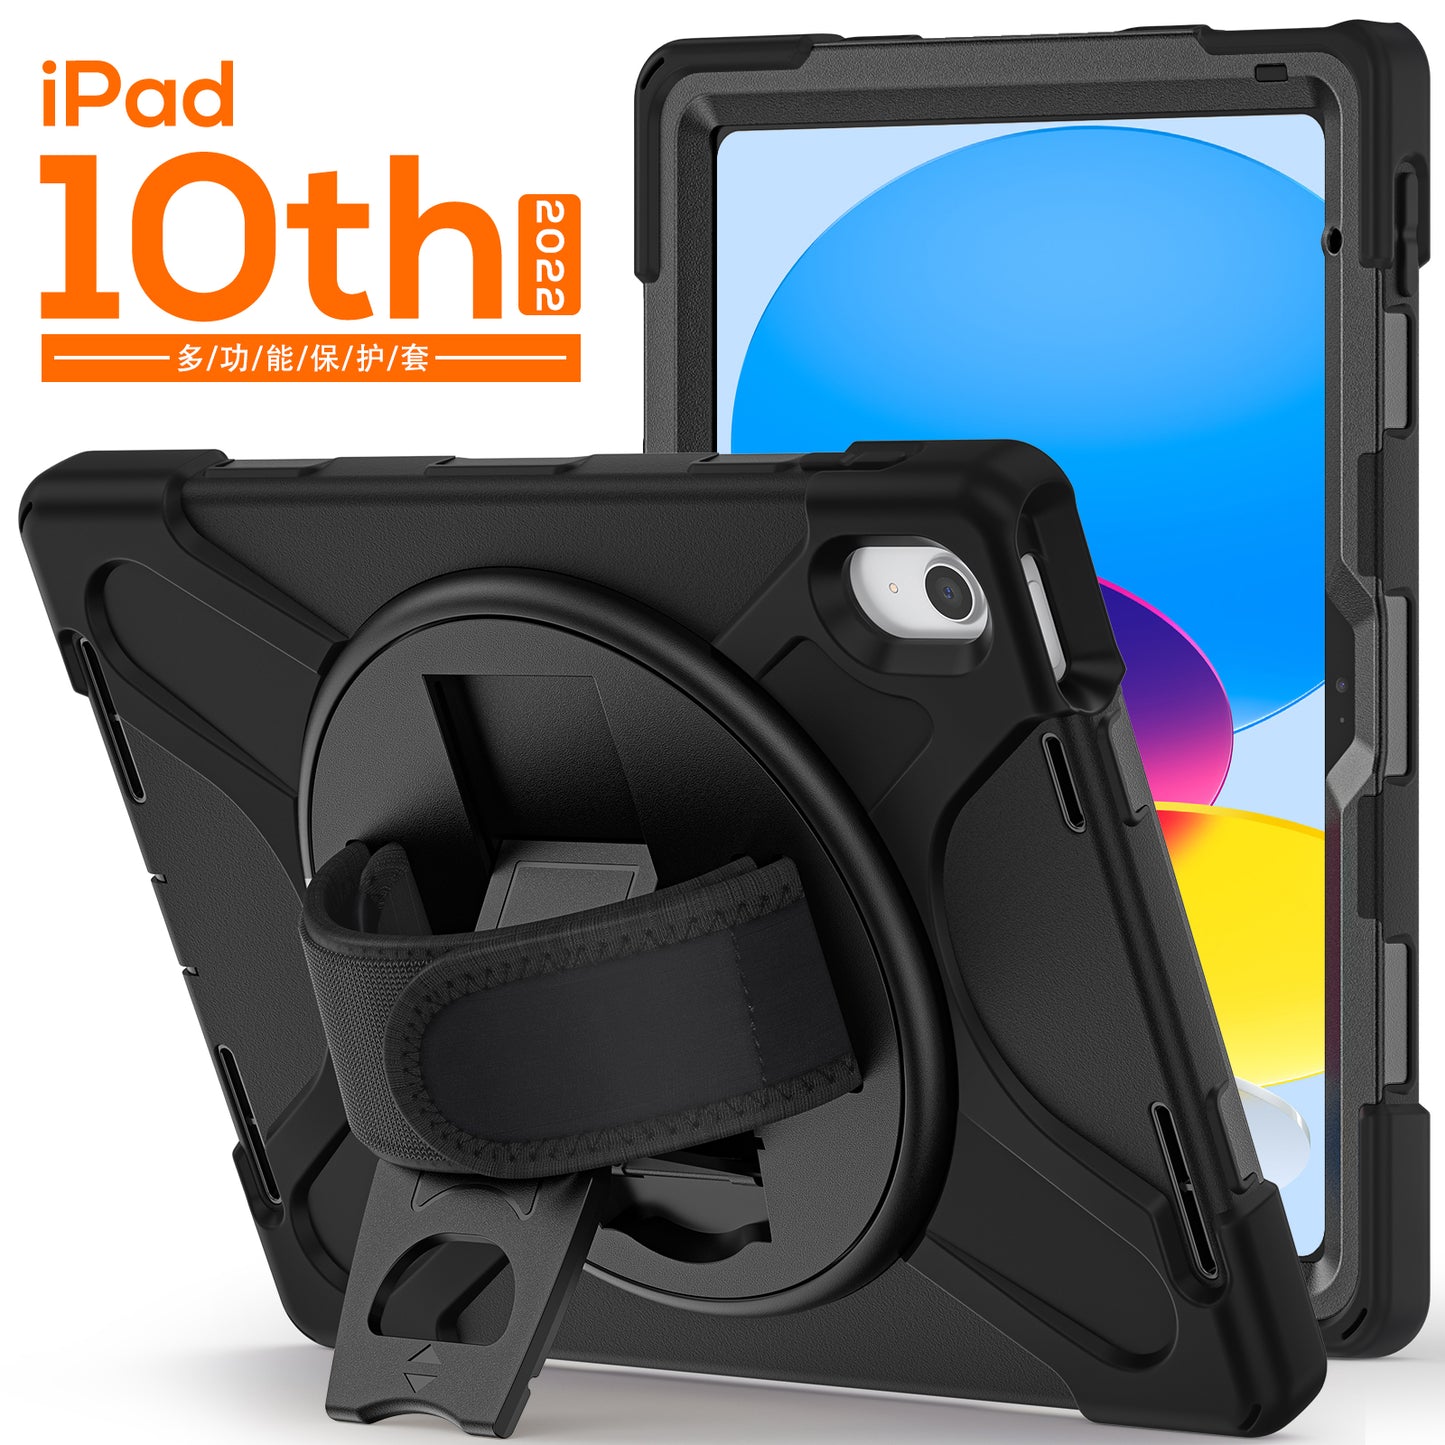 Pirate King iPad 10 Case 360 Rotating Stand with Hand Holder Shoulder Strap